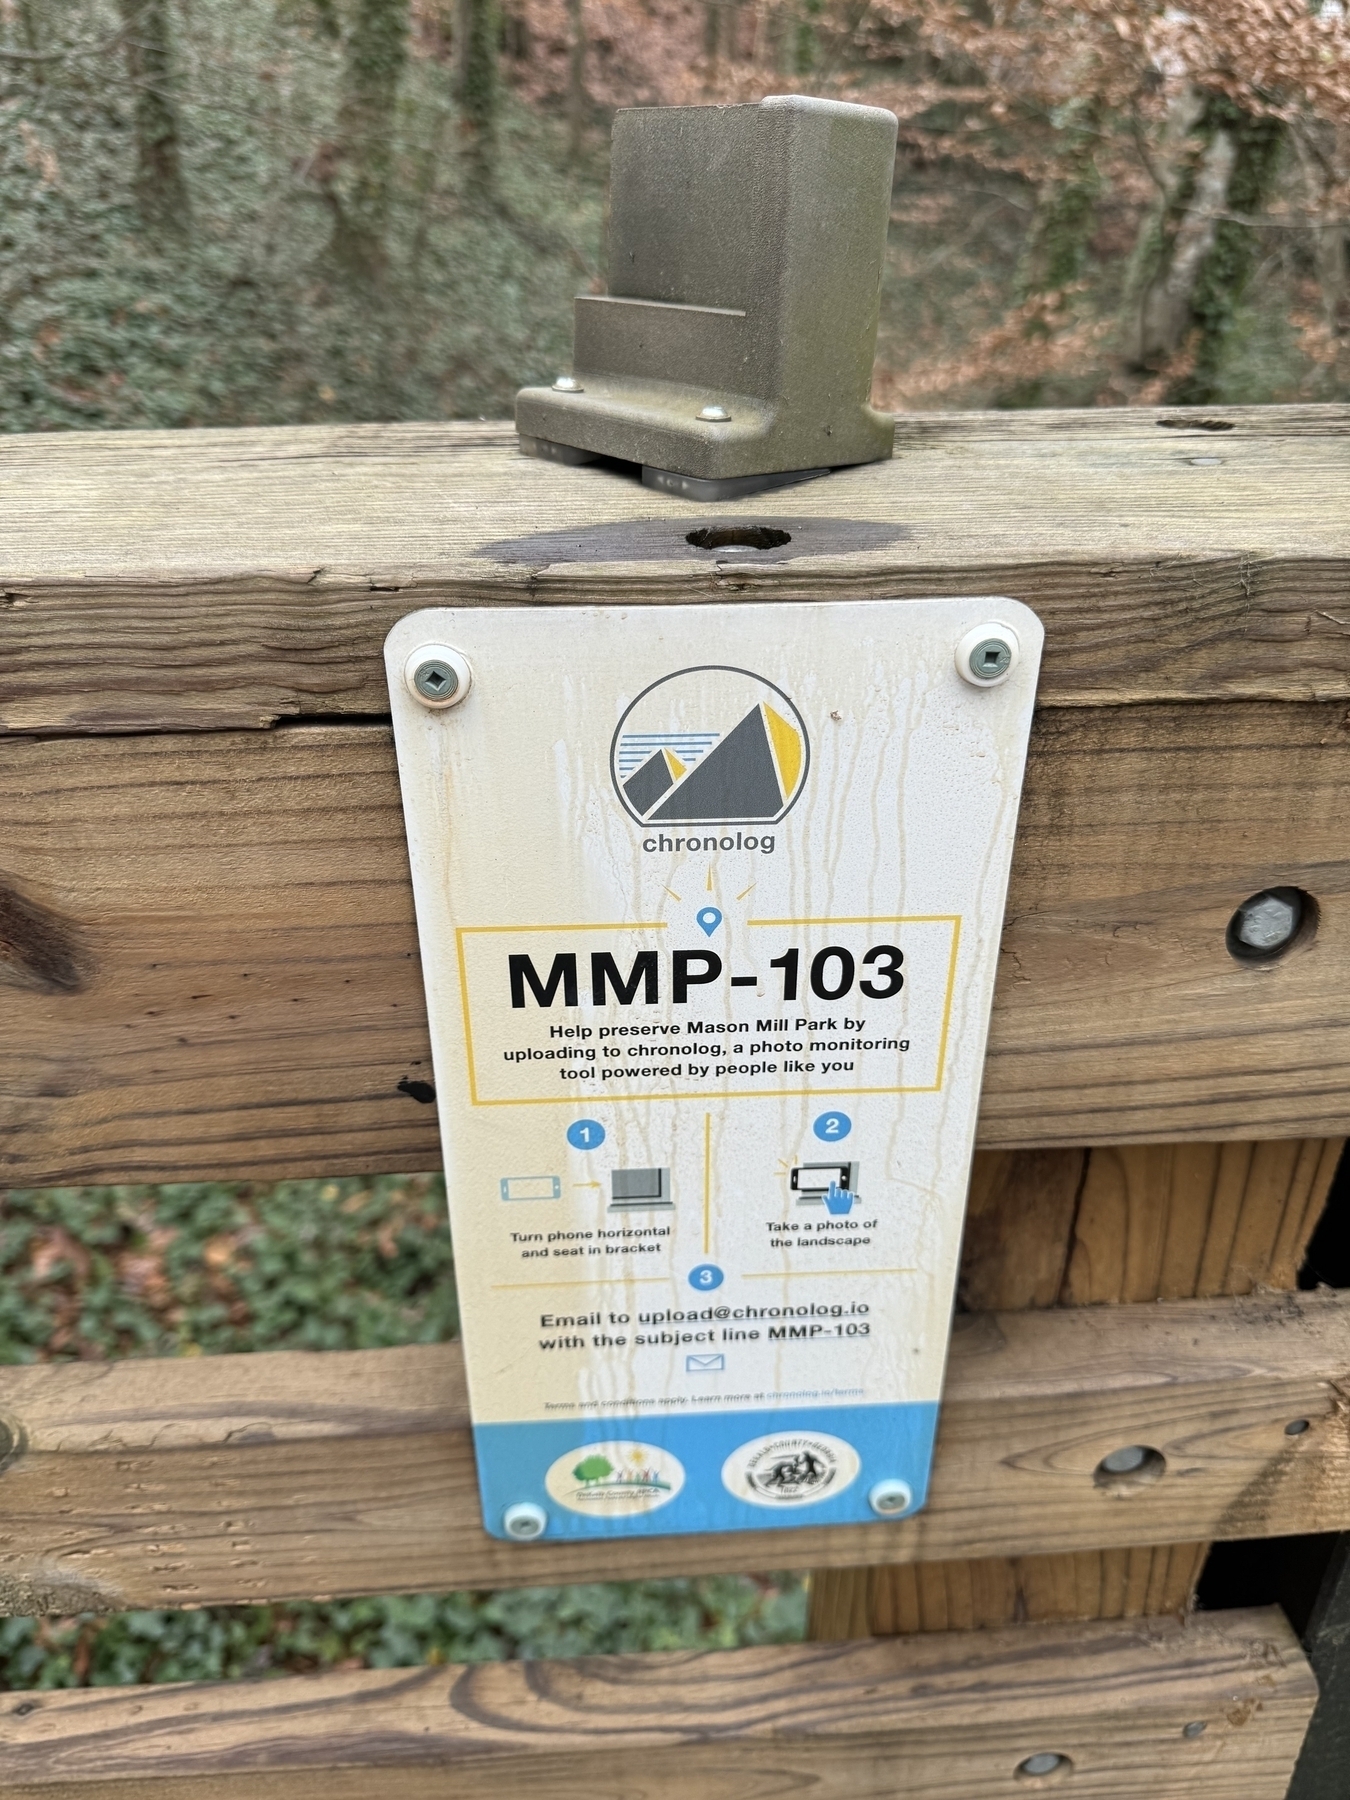 A sign with the ID MMP-103 and instructions for how to take a photo and email to uploads@chronolog.io